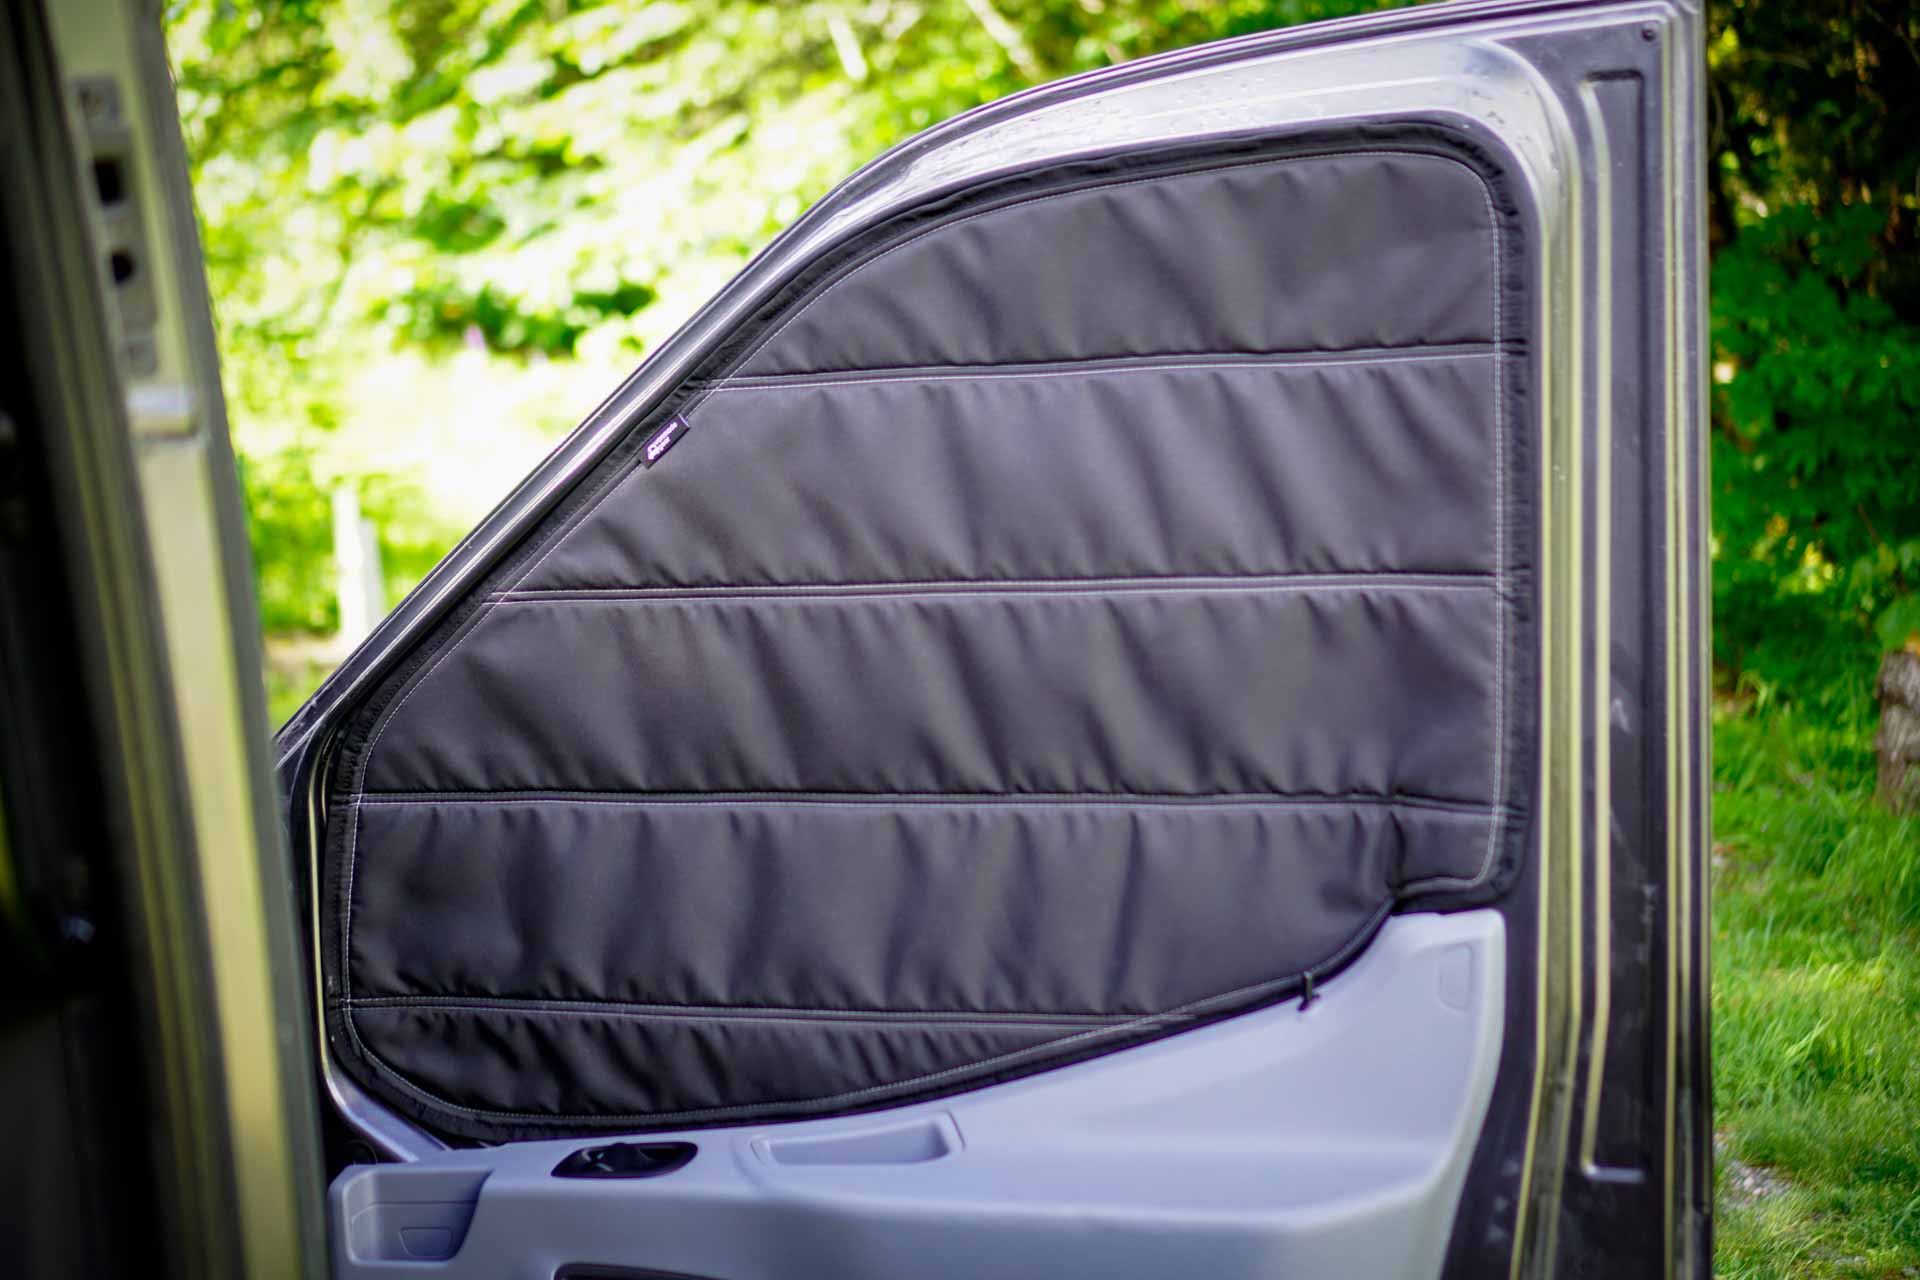 How To Cover Car Windows For Sleeping